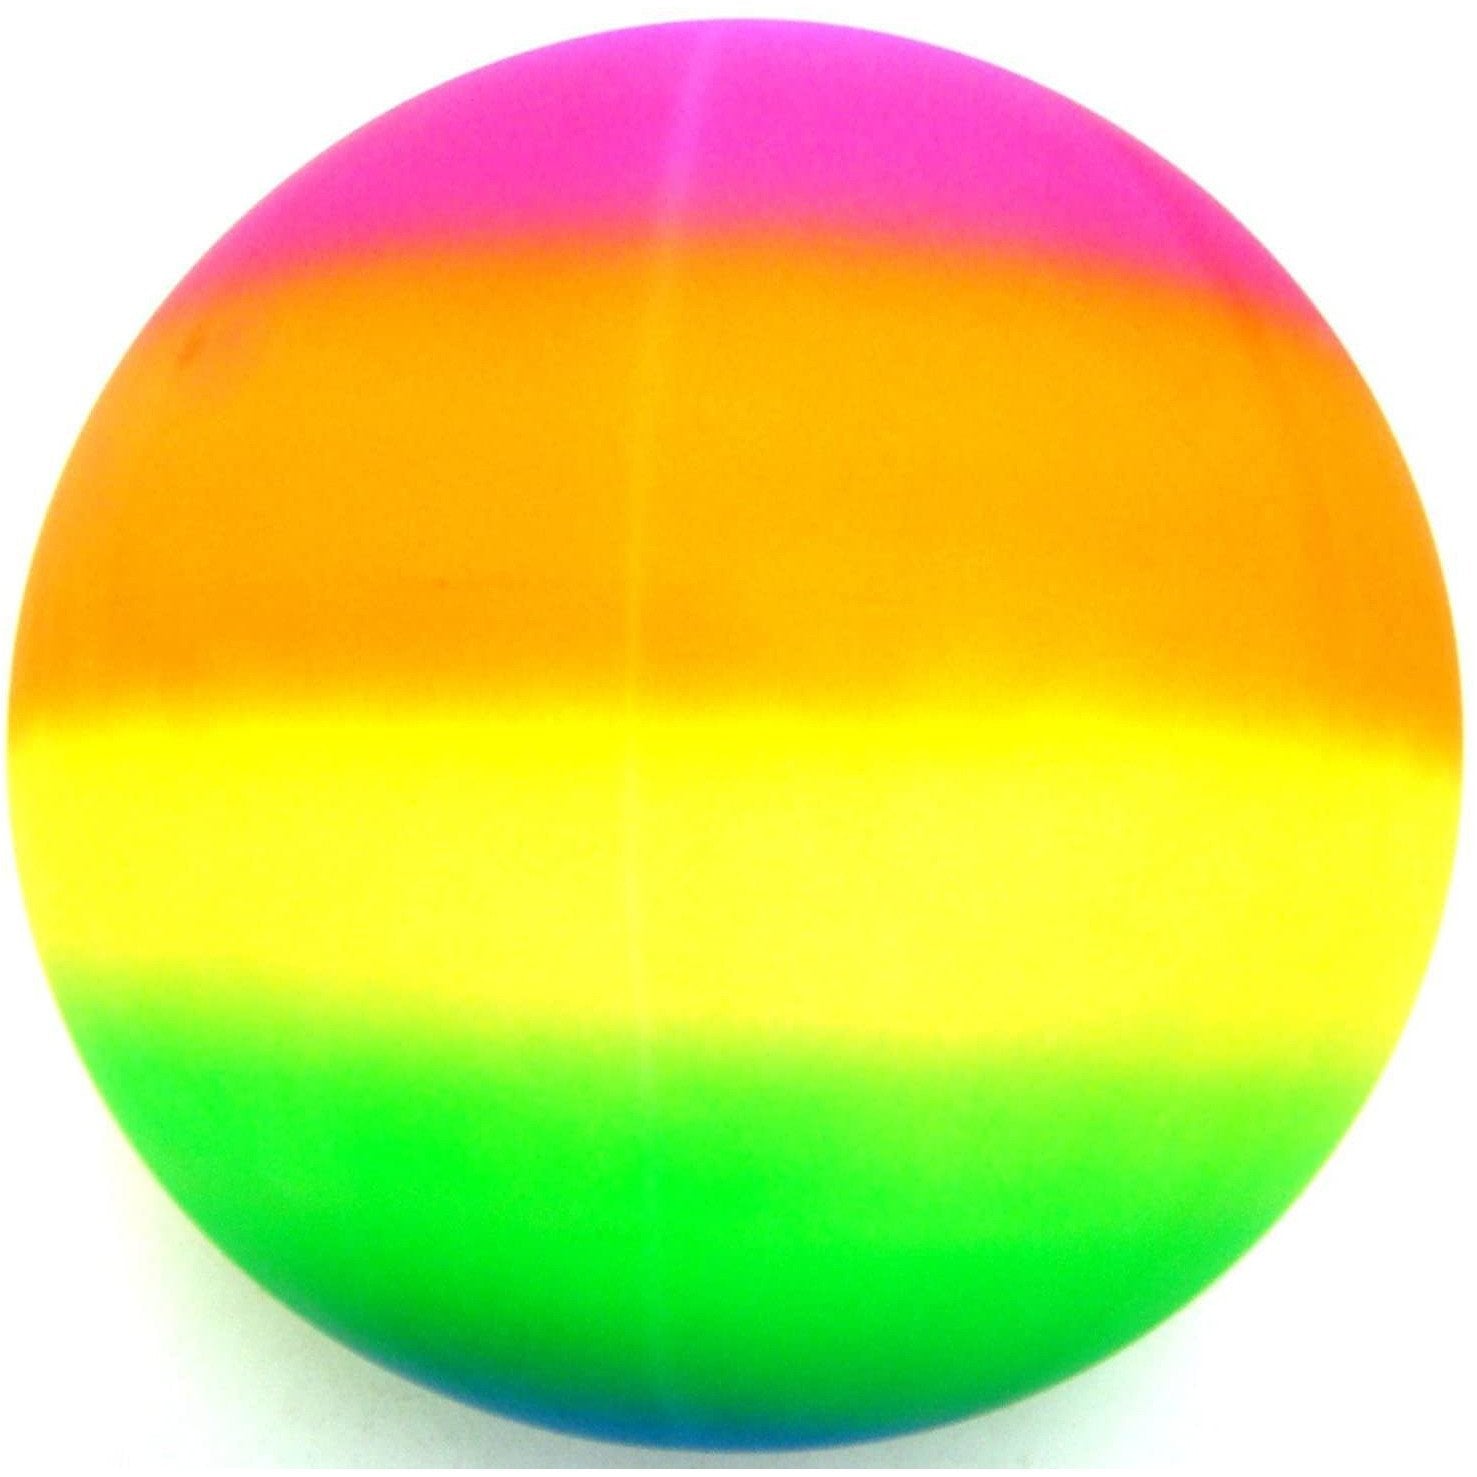 Giant Neon Rainbow Ball The Magic Toy Shop - The Magic Toy Shop